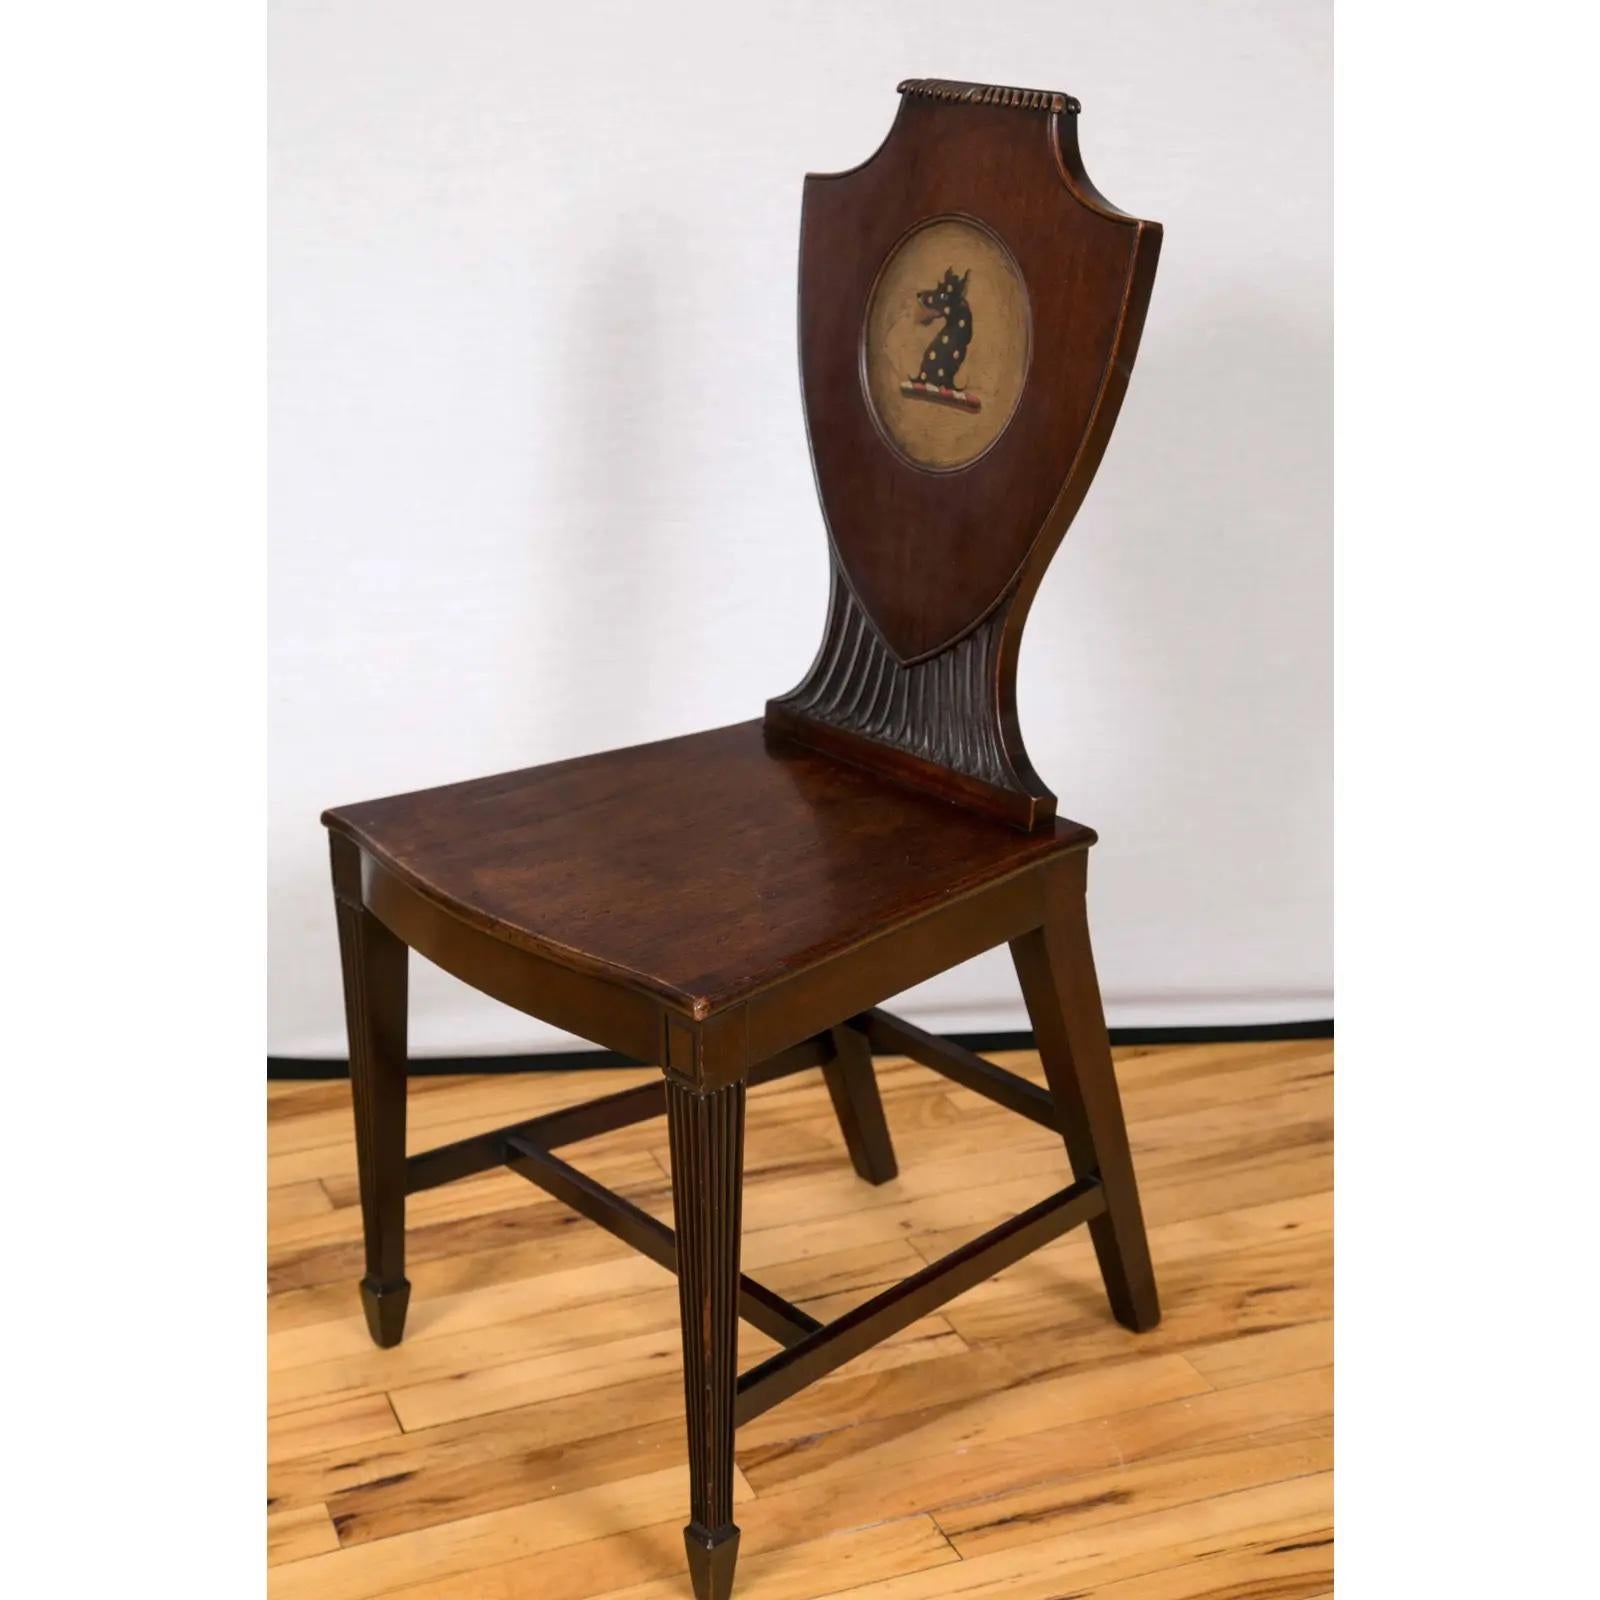 A pair of late 18th century mahogany hall chairs with shield form backs centered by oval reserves painted with an heraldic devices. Bow front seats are raised on tapered and reeded legs, terminating in spade feet.